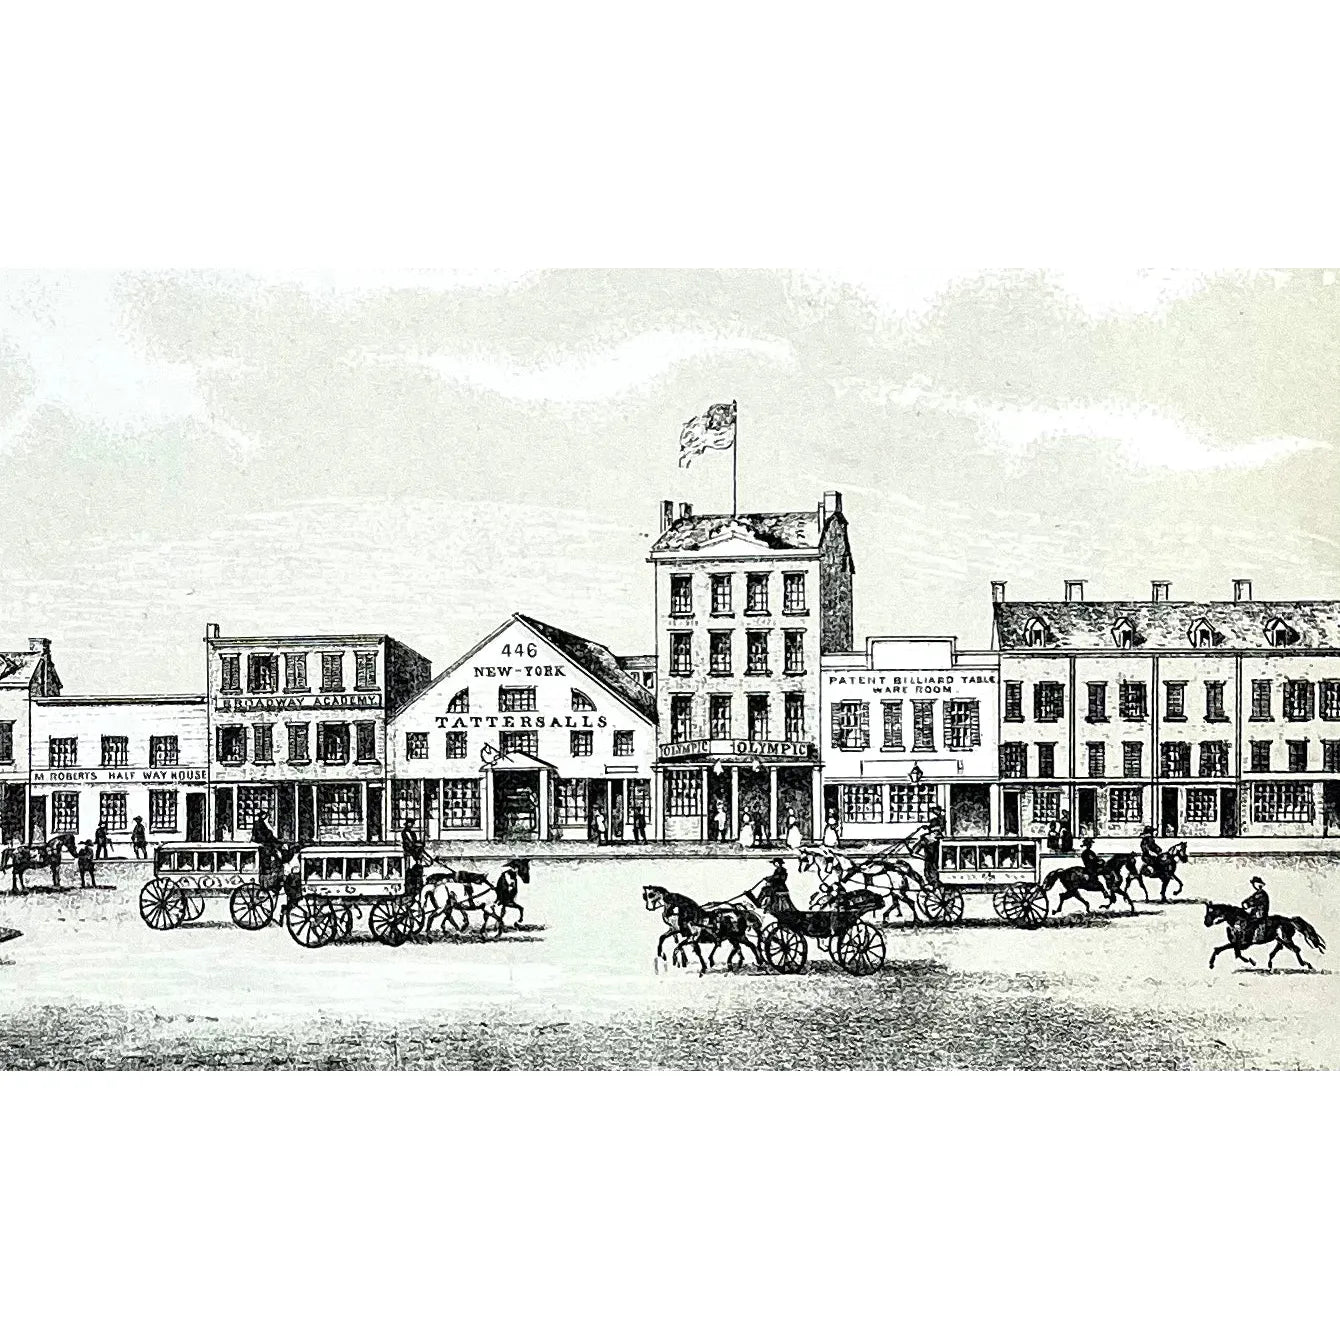 Original antique print of Broadway In New York from the 1840s at Howard and Grand Streets, showing Broadway Academy, Rondon’s, Harrington, Tattersall, Hayward, Patent Billiard, Roberts Halfway House, Olympic and Pearl with Horse and Buggies roaming the streets